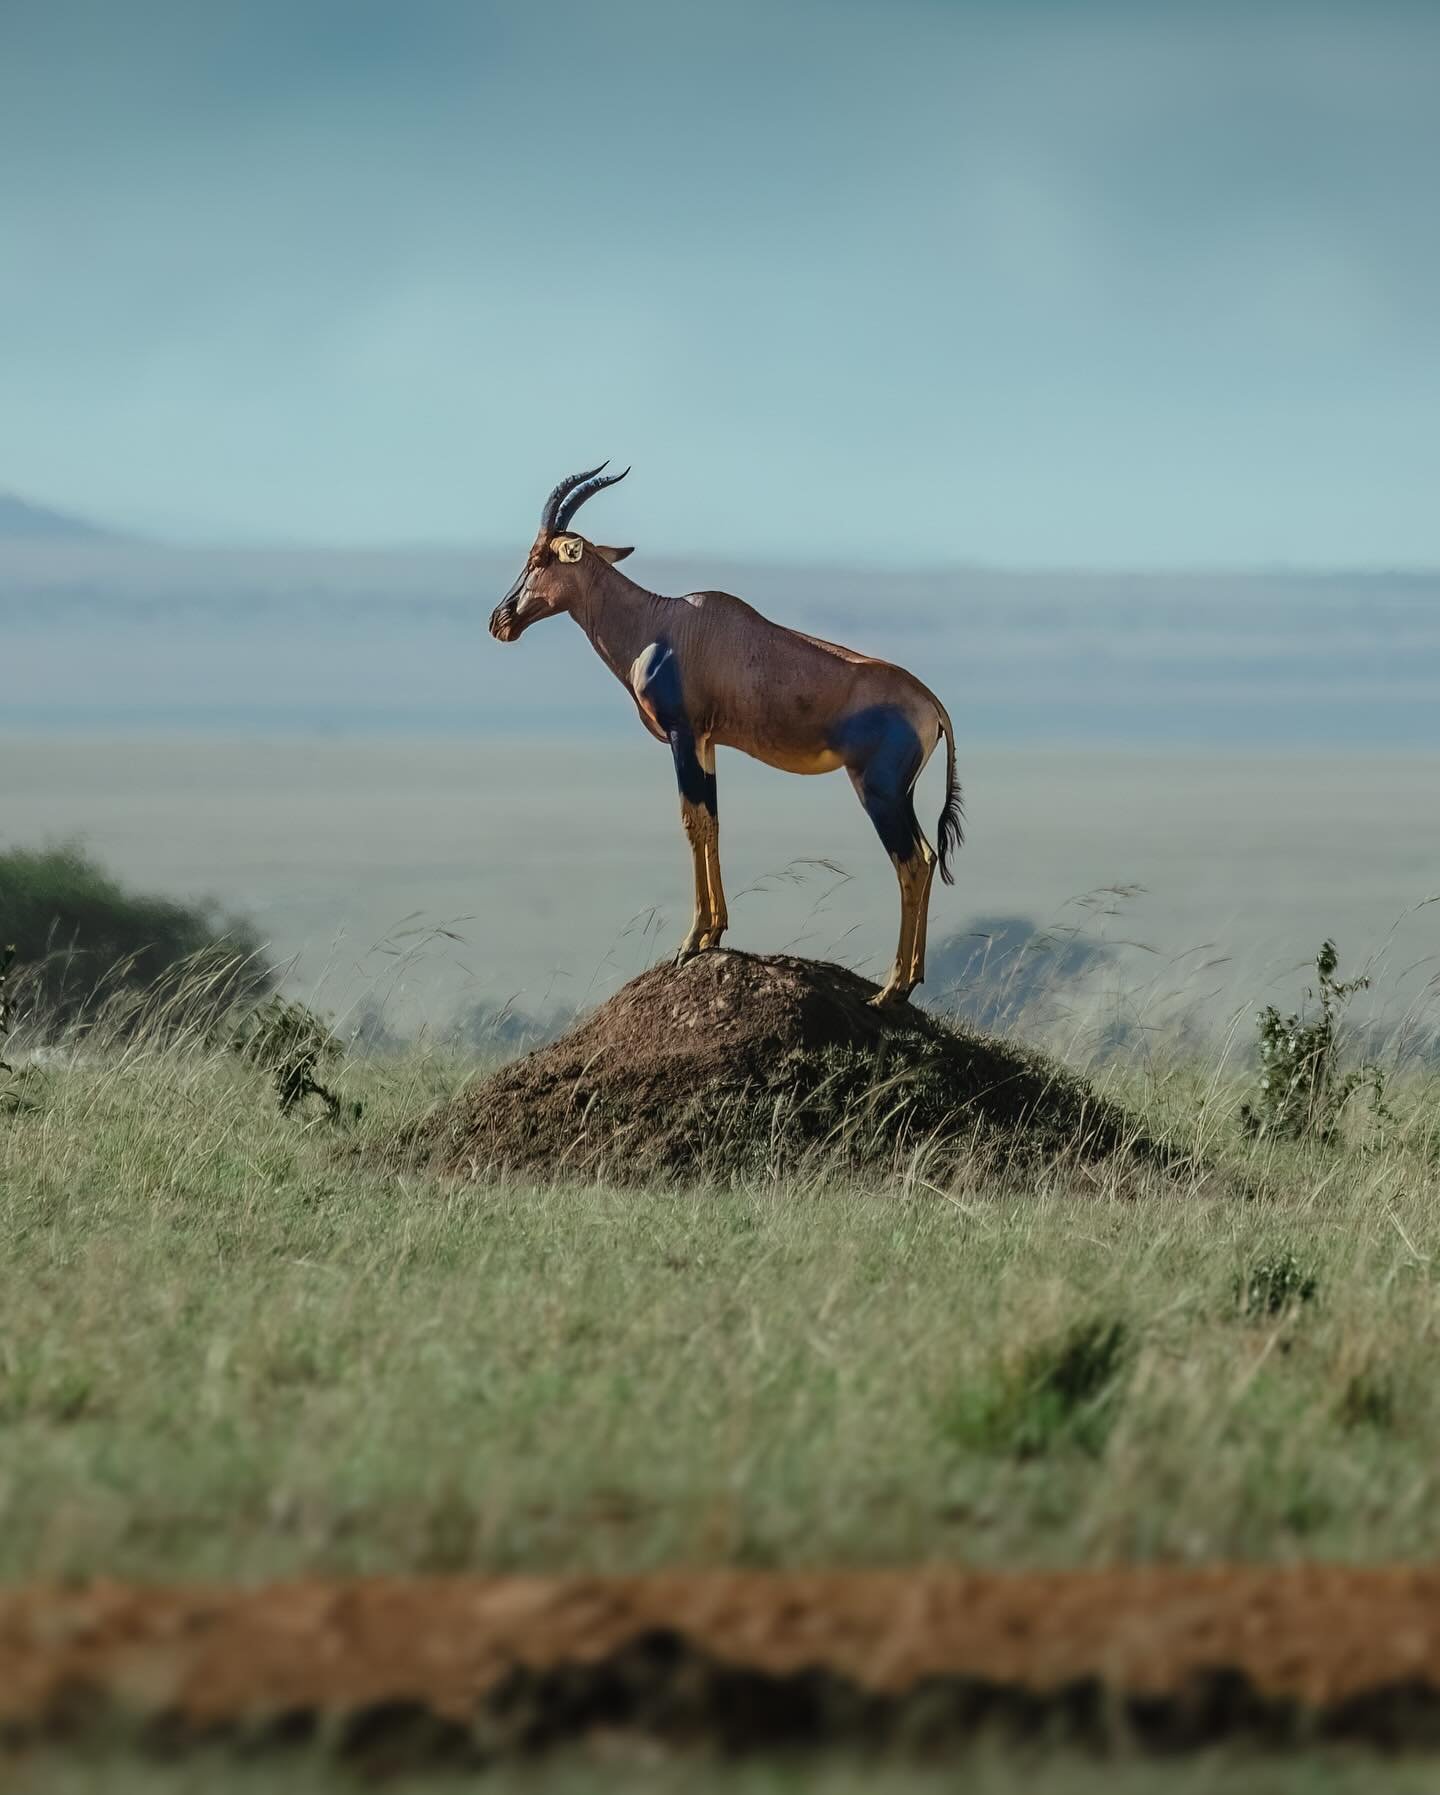 a Topi overlooking its kingdom 👑

&mdash; Topis are a very speedy and incredibly social antelope species found in the savannas, floodplains and semi-deserts of sub-Saharan Africa. They are most famous for their sentry behavior; where one individual 